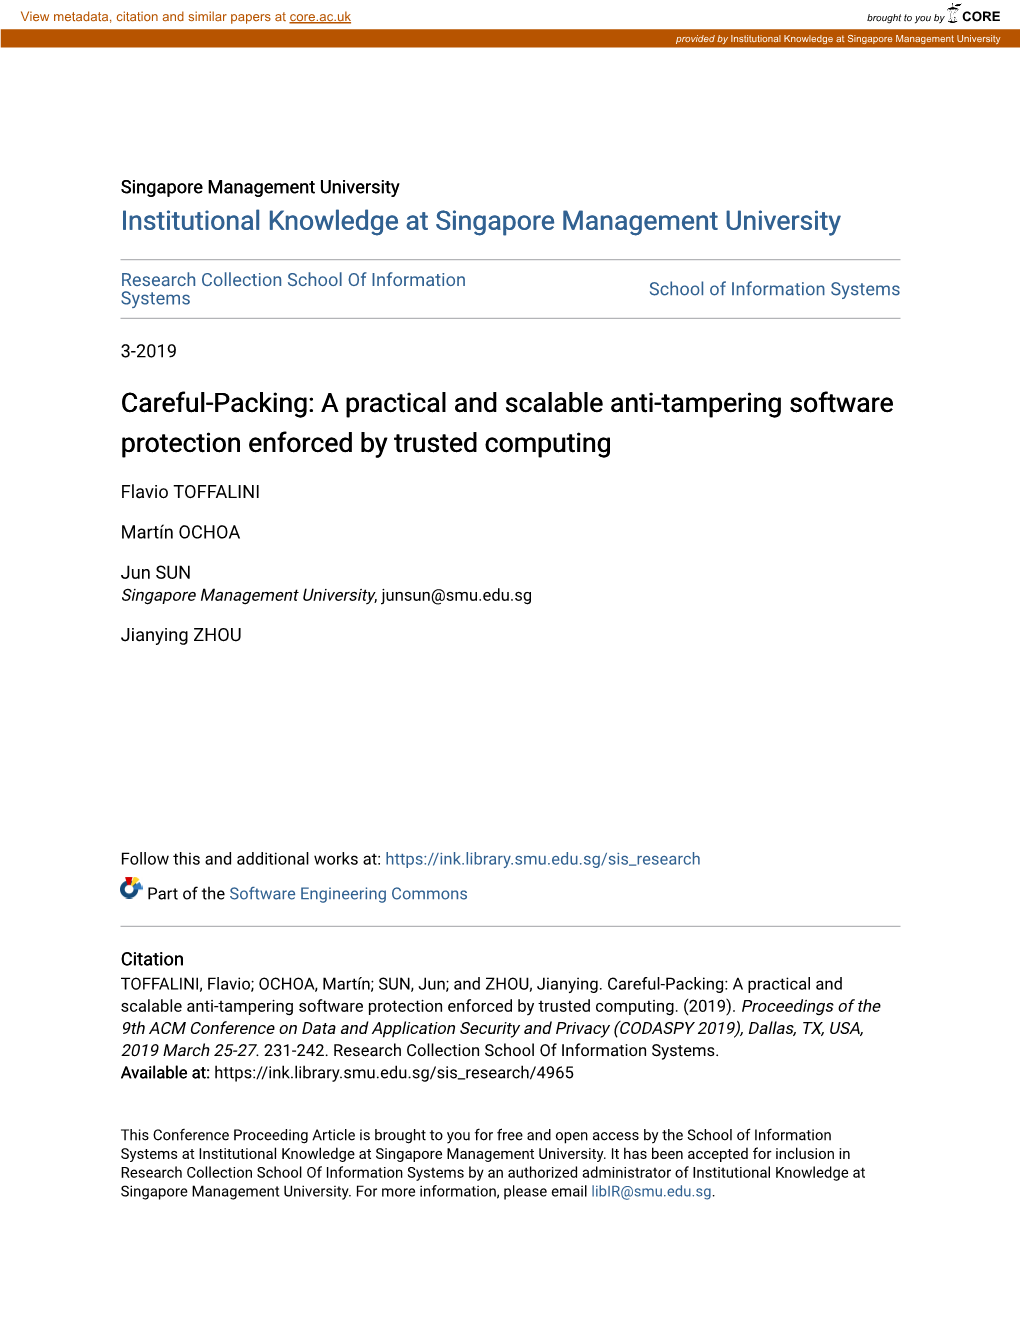 A Practical and Scalable Anti-Tampering Software Protection Enforced by Trusted Computing